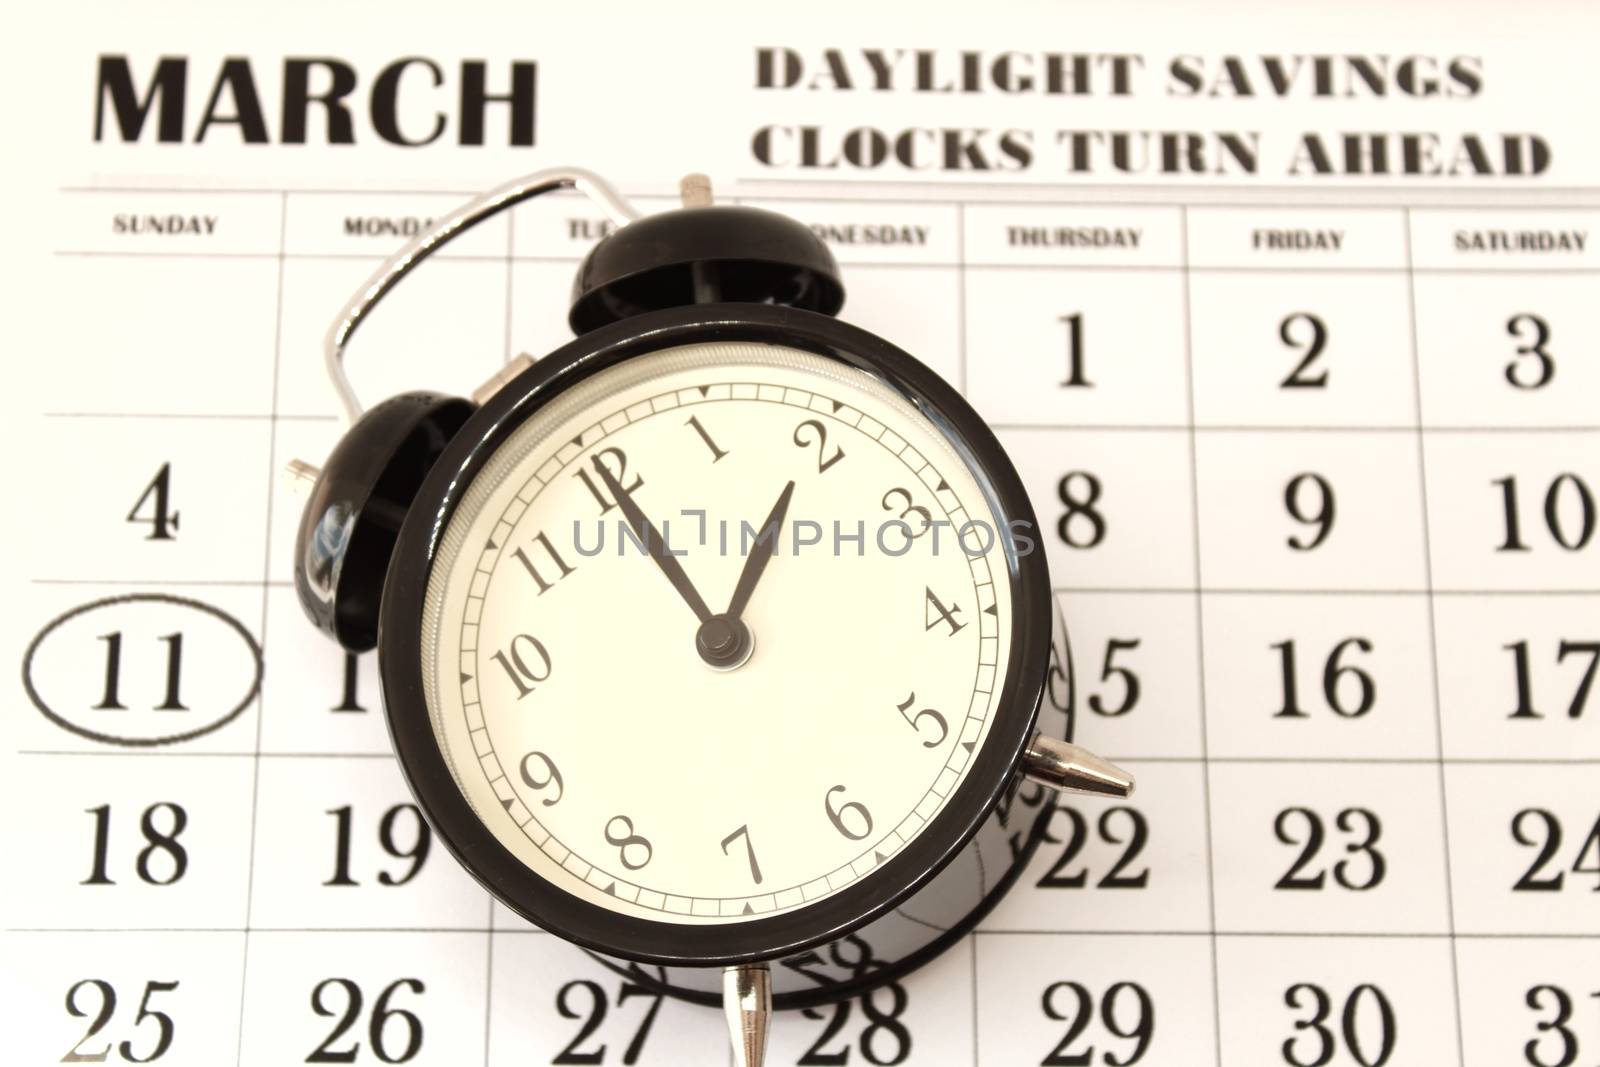 Daylight Savings Spring Forward sunday at 2:00 a.m. March 11 date indicated in the calendar